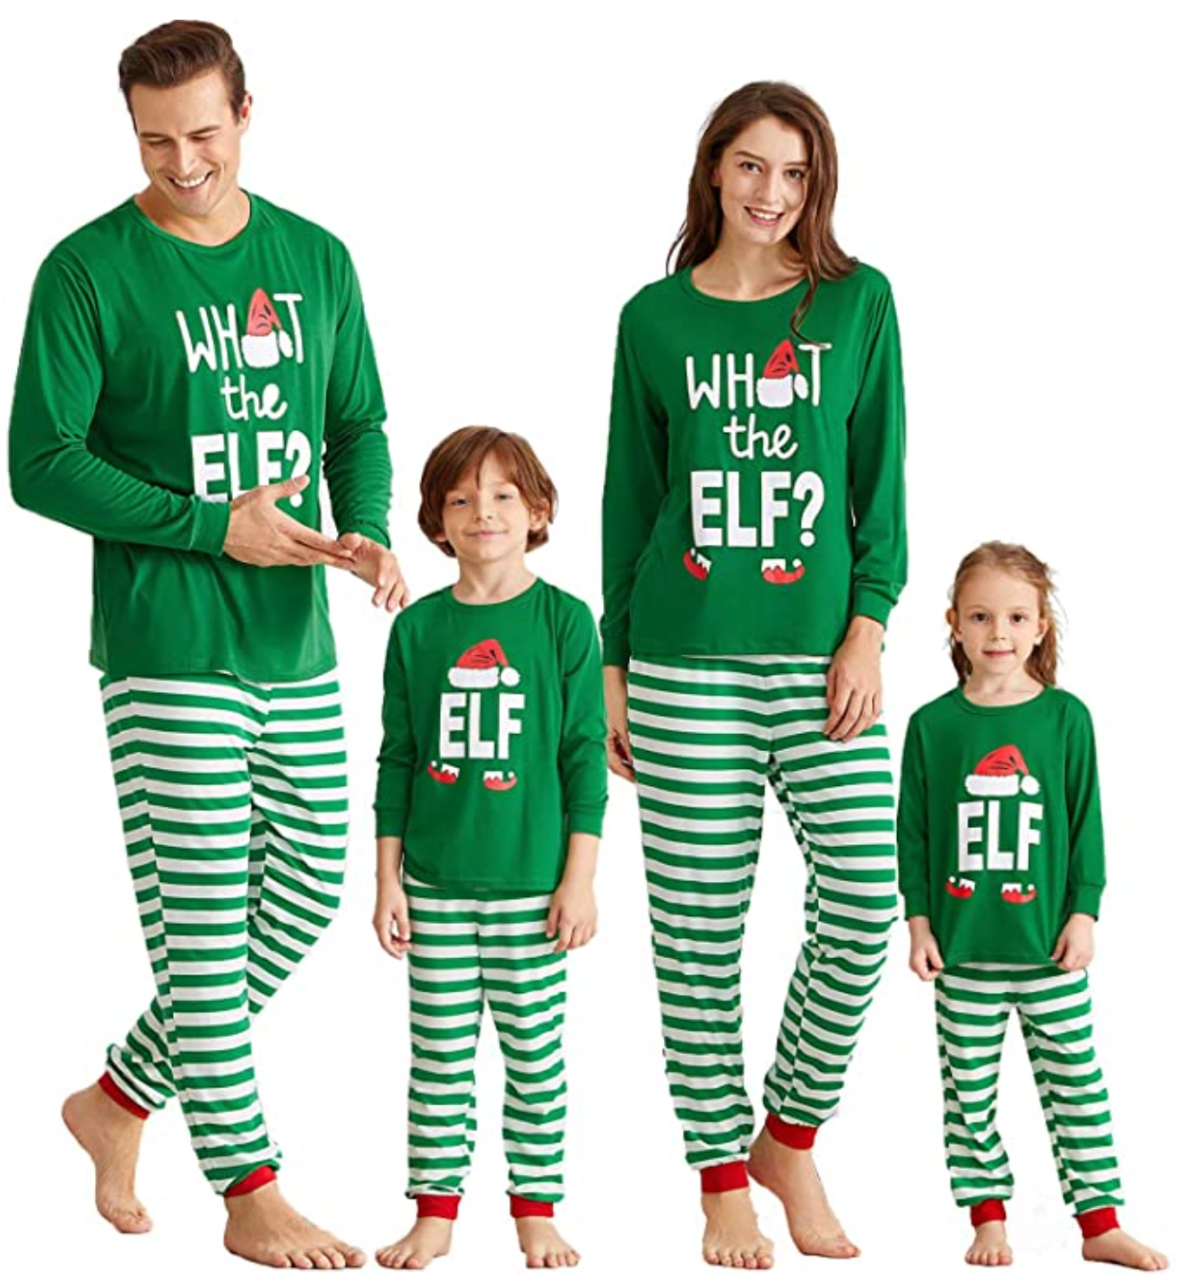 Amazon Festive PJ’s That Will Get You in the Holiday Spirit | Us Weekly